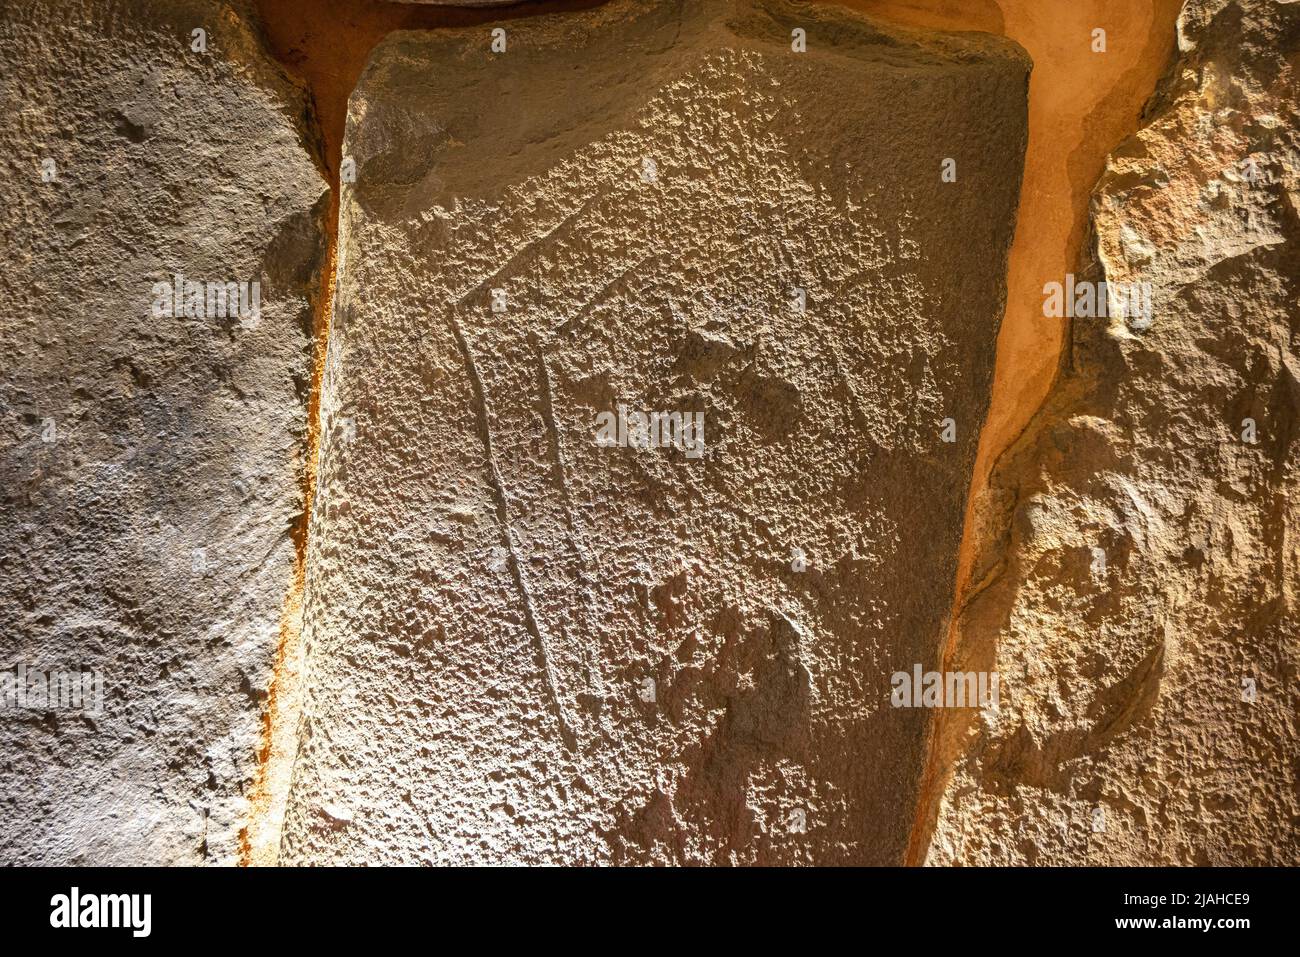 Artistic manifestation engraved in the stone in the megalithic monument of El dolmen de Soto Stock Photo